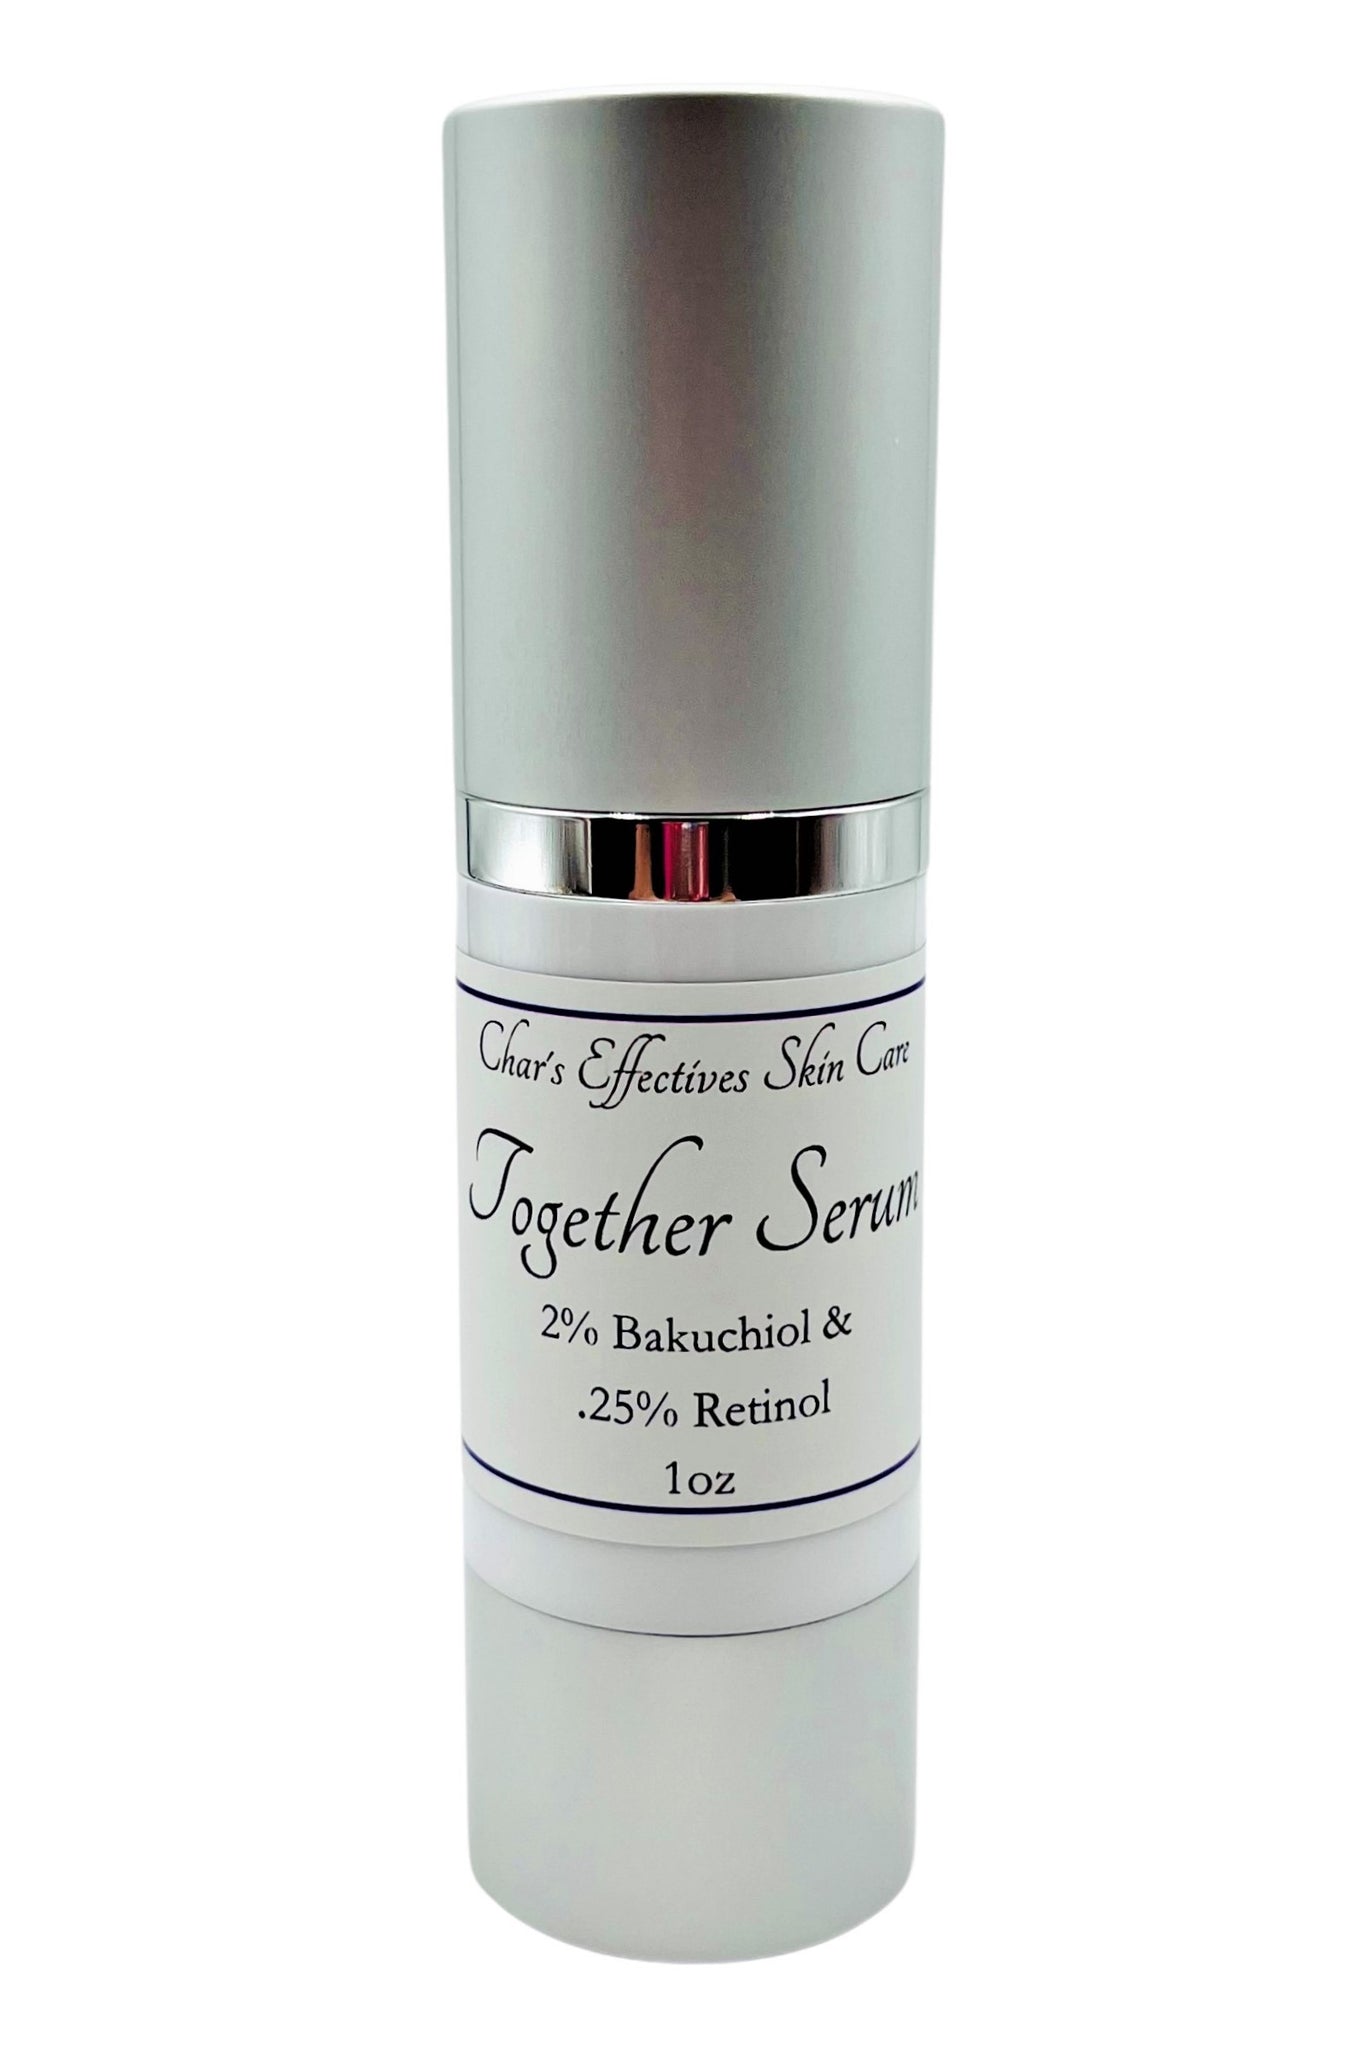 Together Serum 2% Bakuchiol and .25% Retinol/White Airless bottle with silver cap and bottom/ 1 oz/ For Sensitive and All Skin Types/ Char's Effectives Skin Care